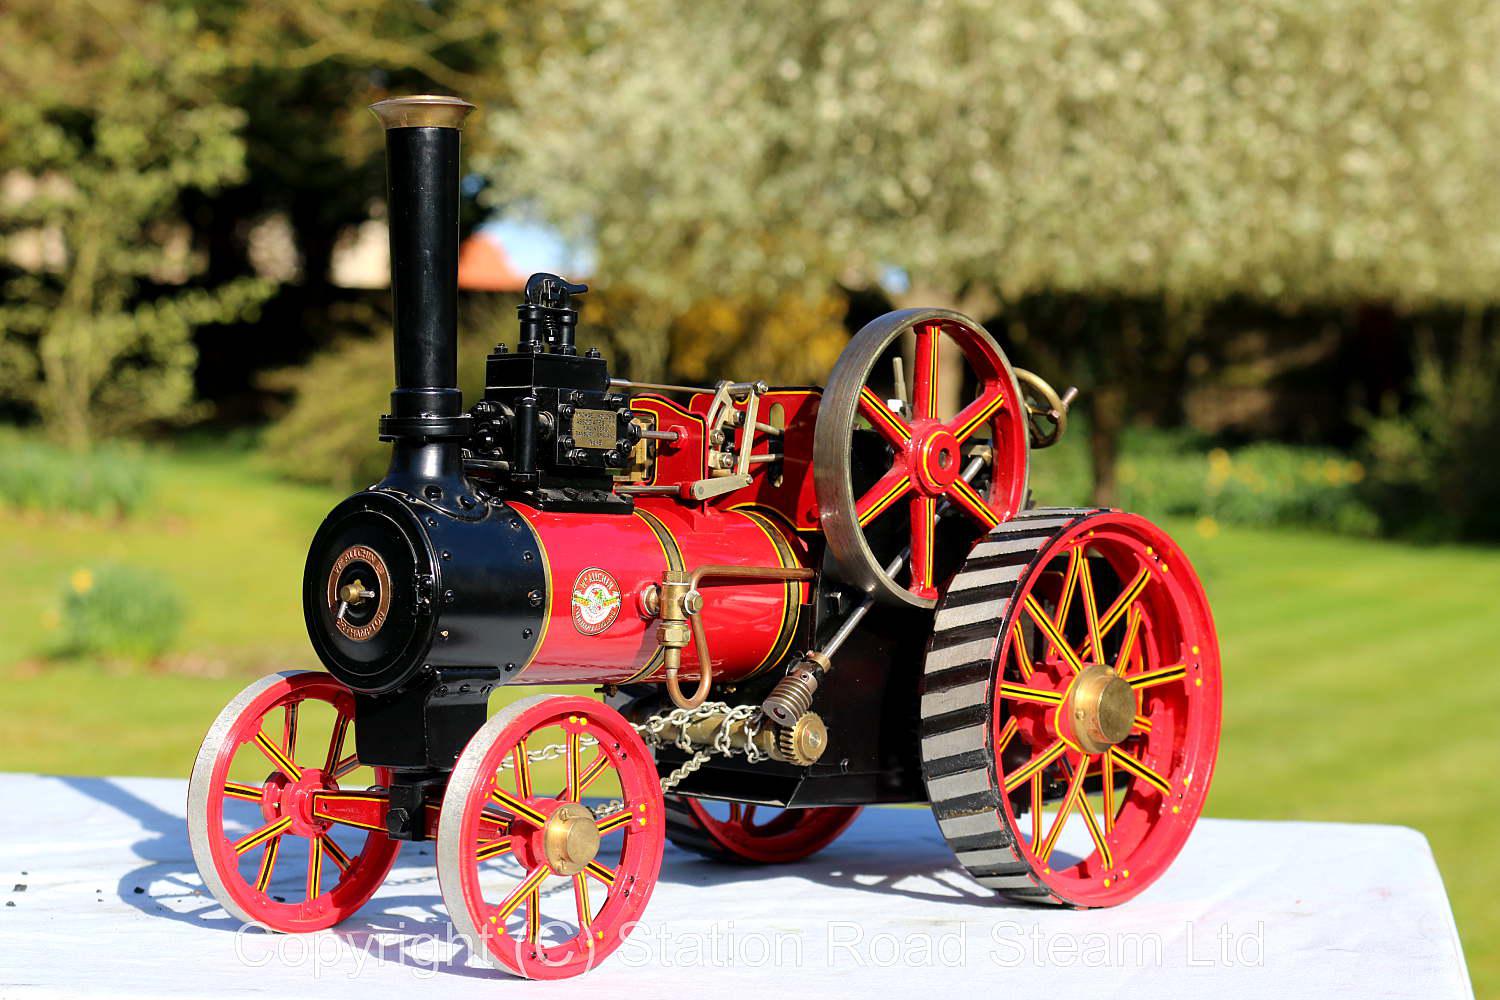 Michael Holden gas-fired Allchin agricultural engine